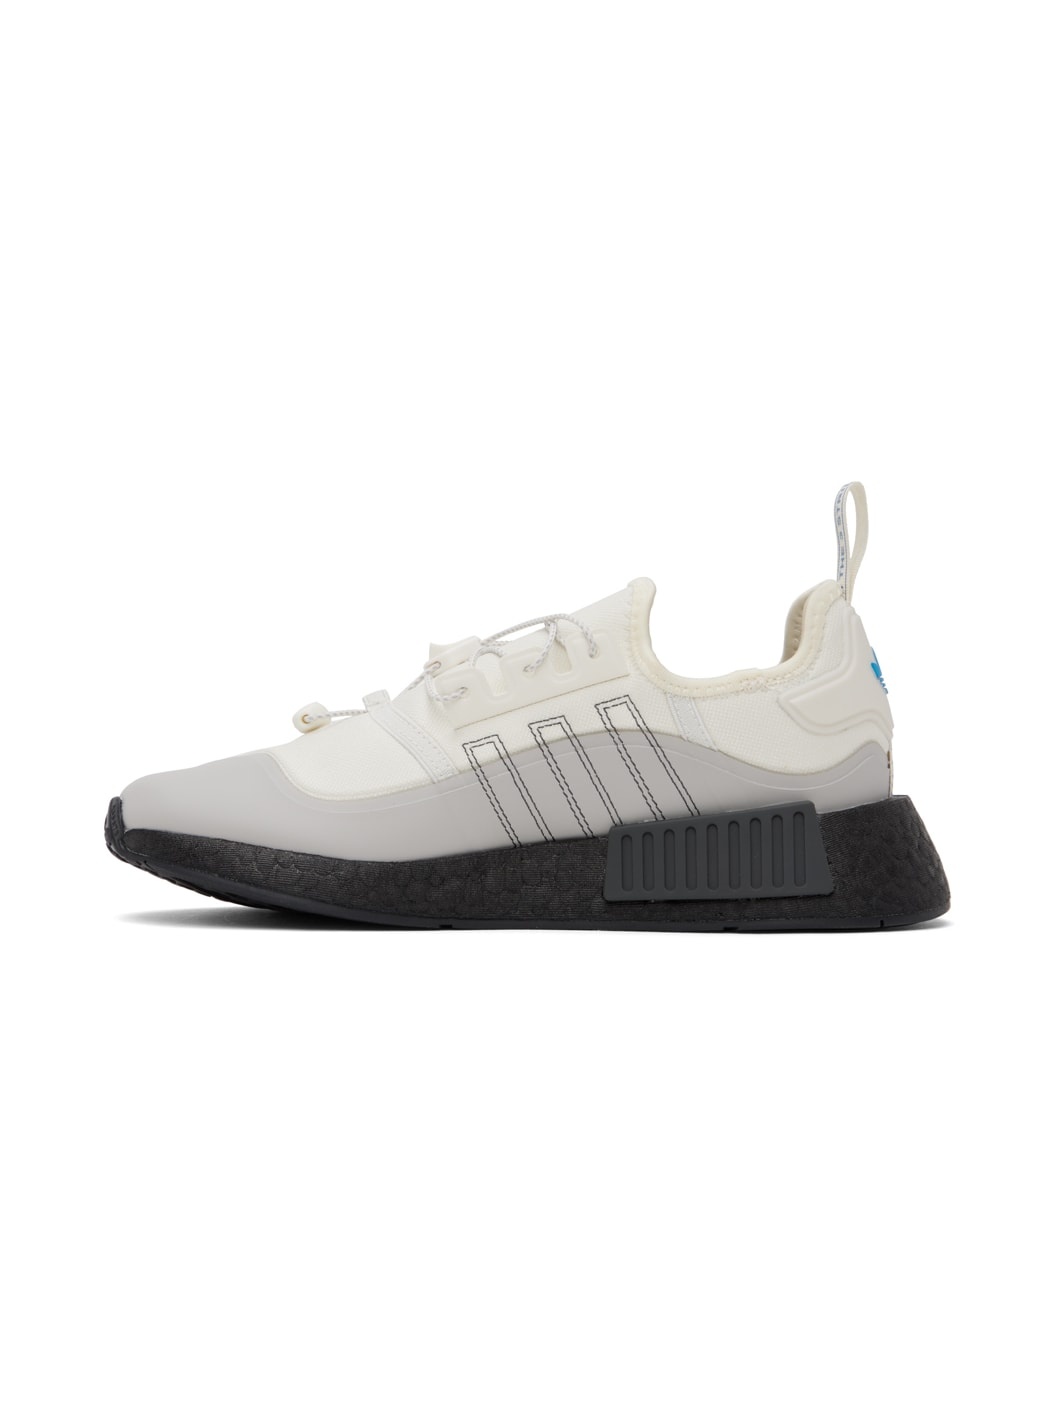 Off-White NMD R1 Sneakers - 3